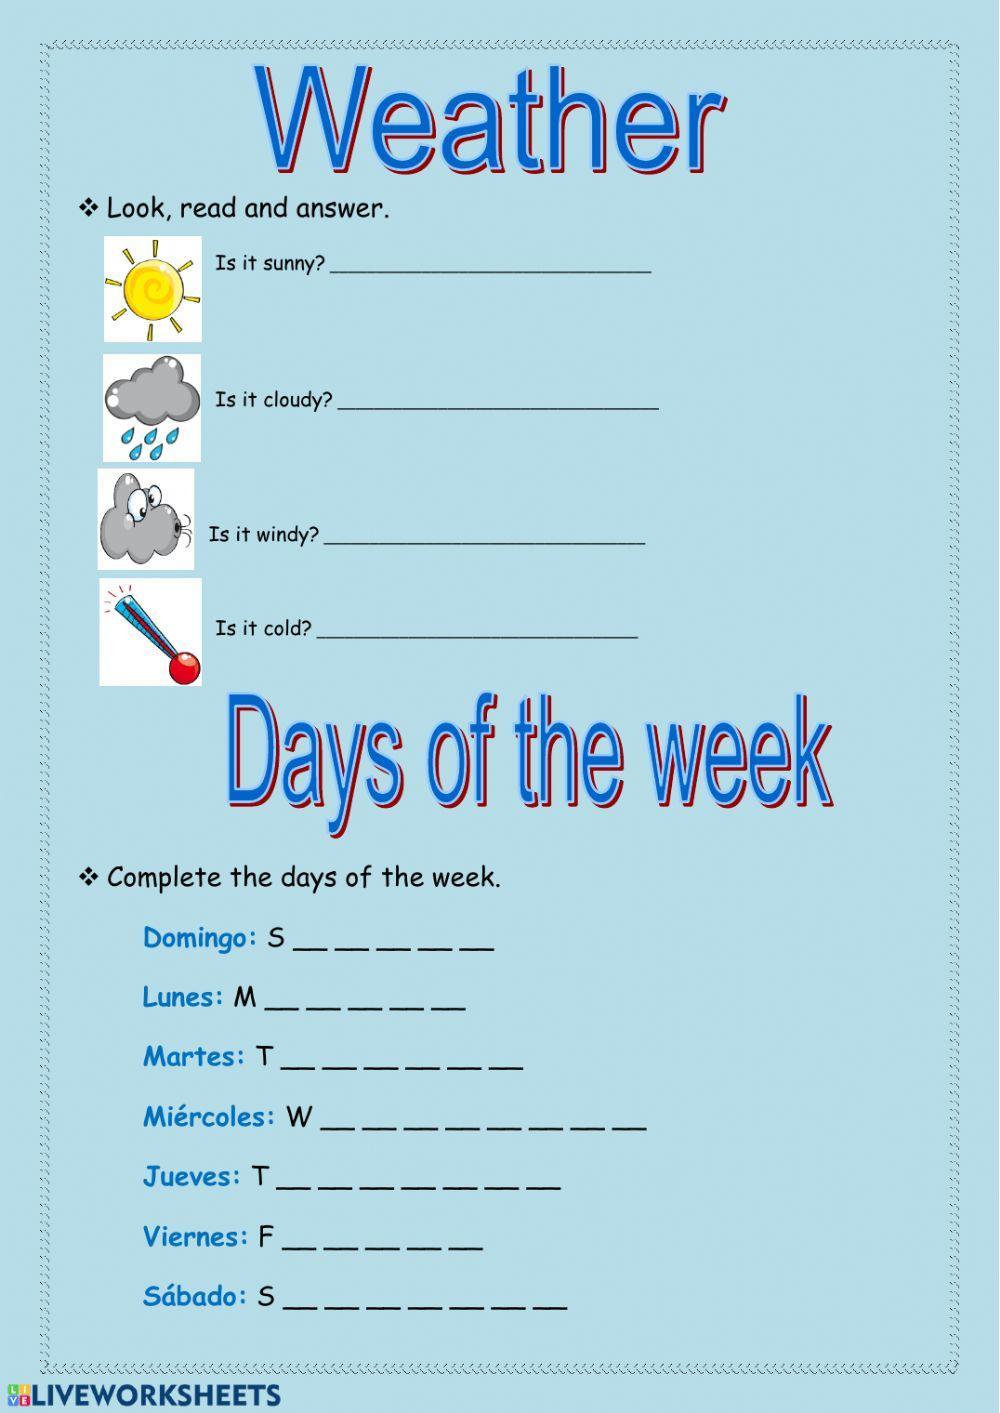 Weather and days of the week